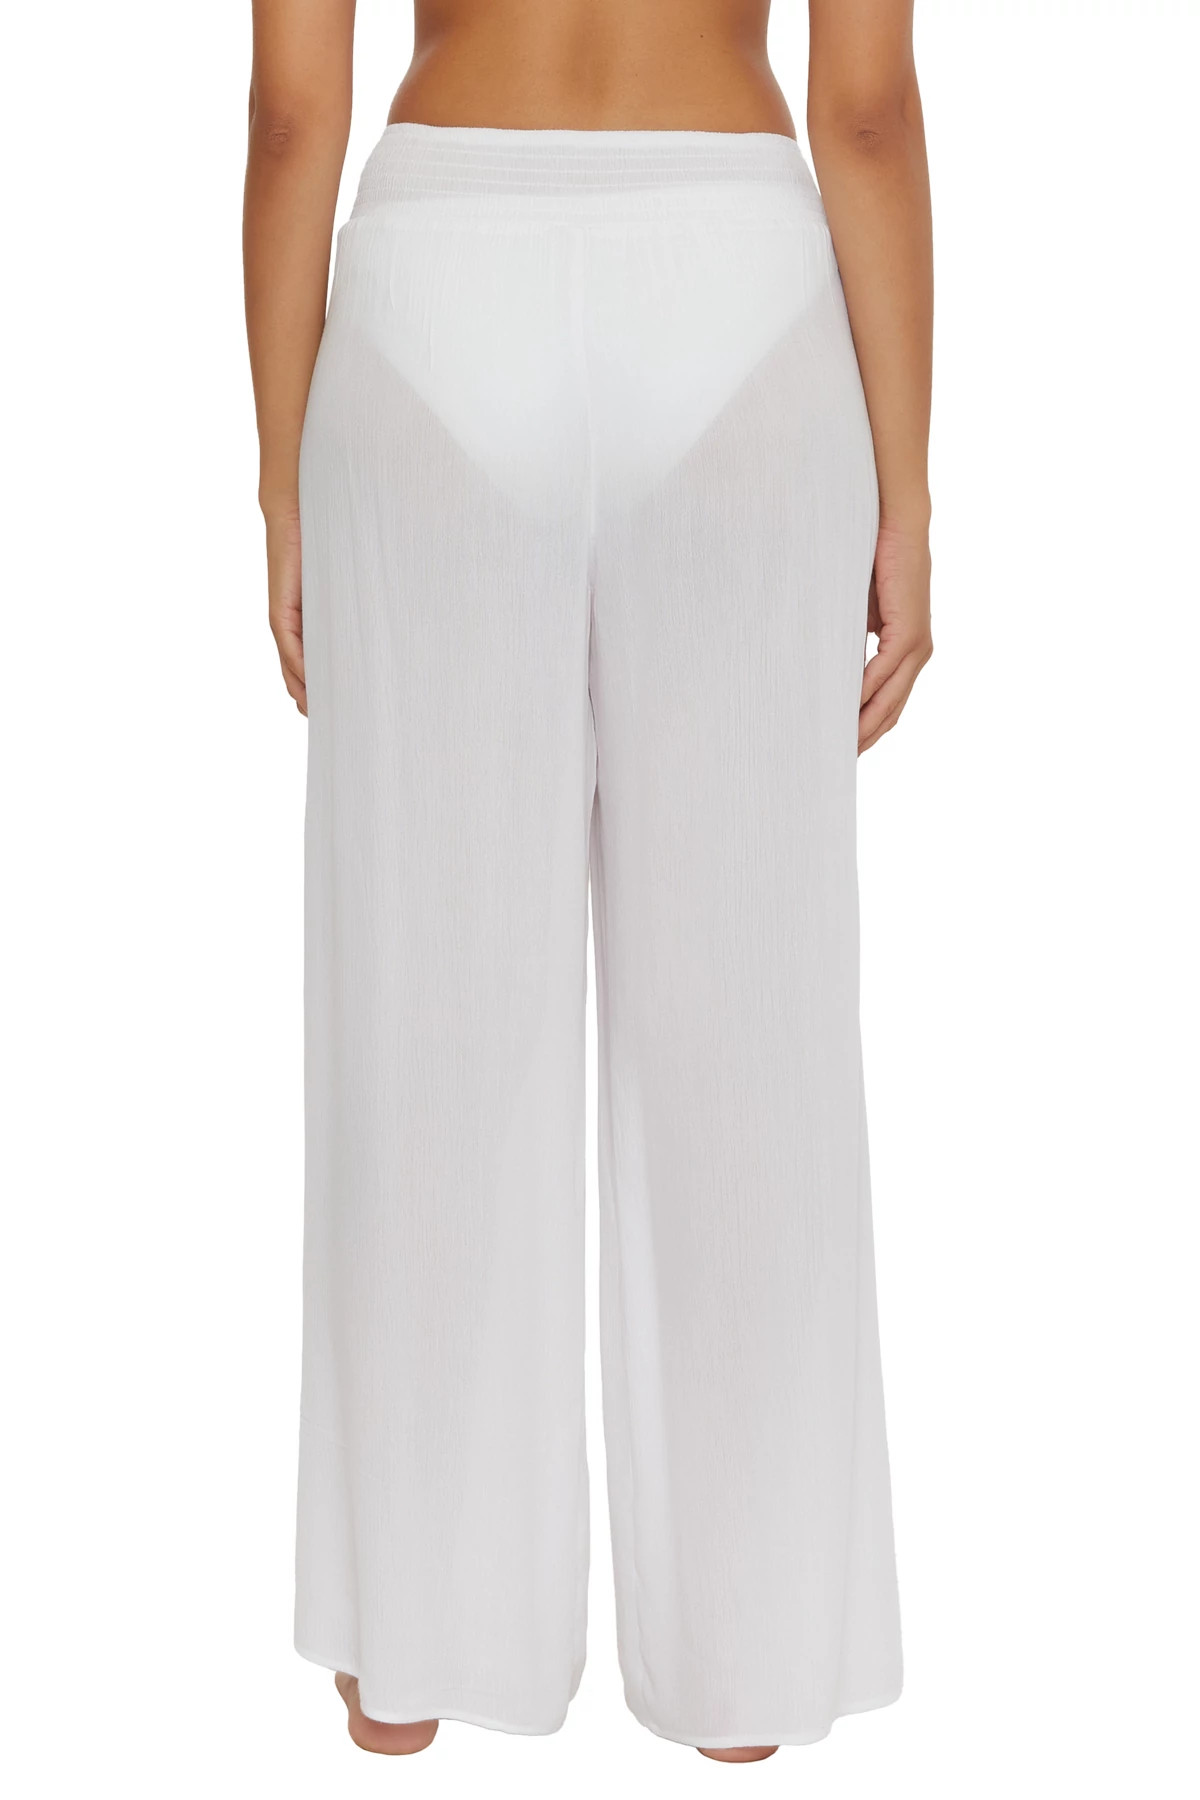 WHITE Ponza Lace Up Woven Pants image number 2